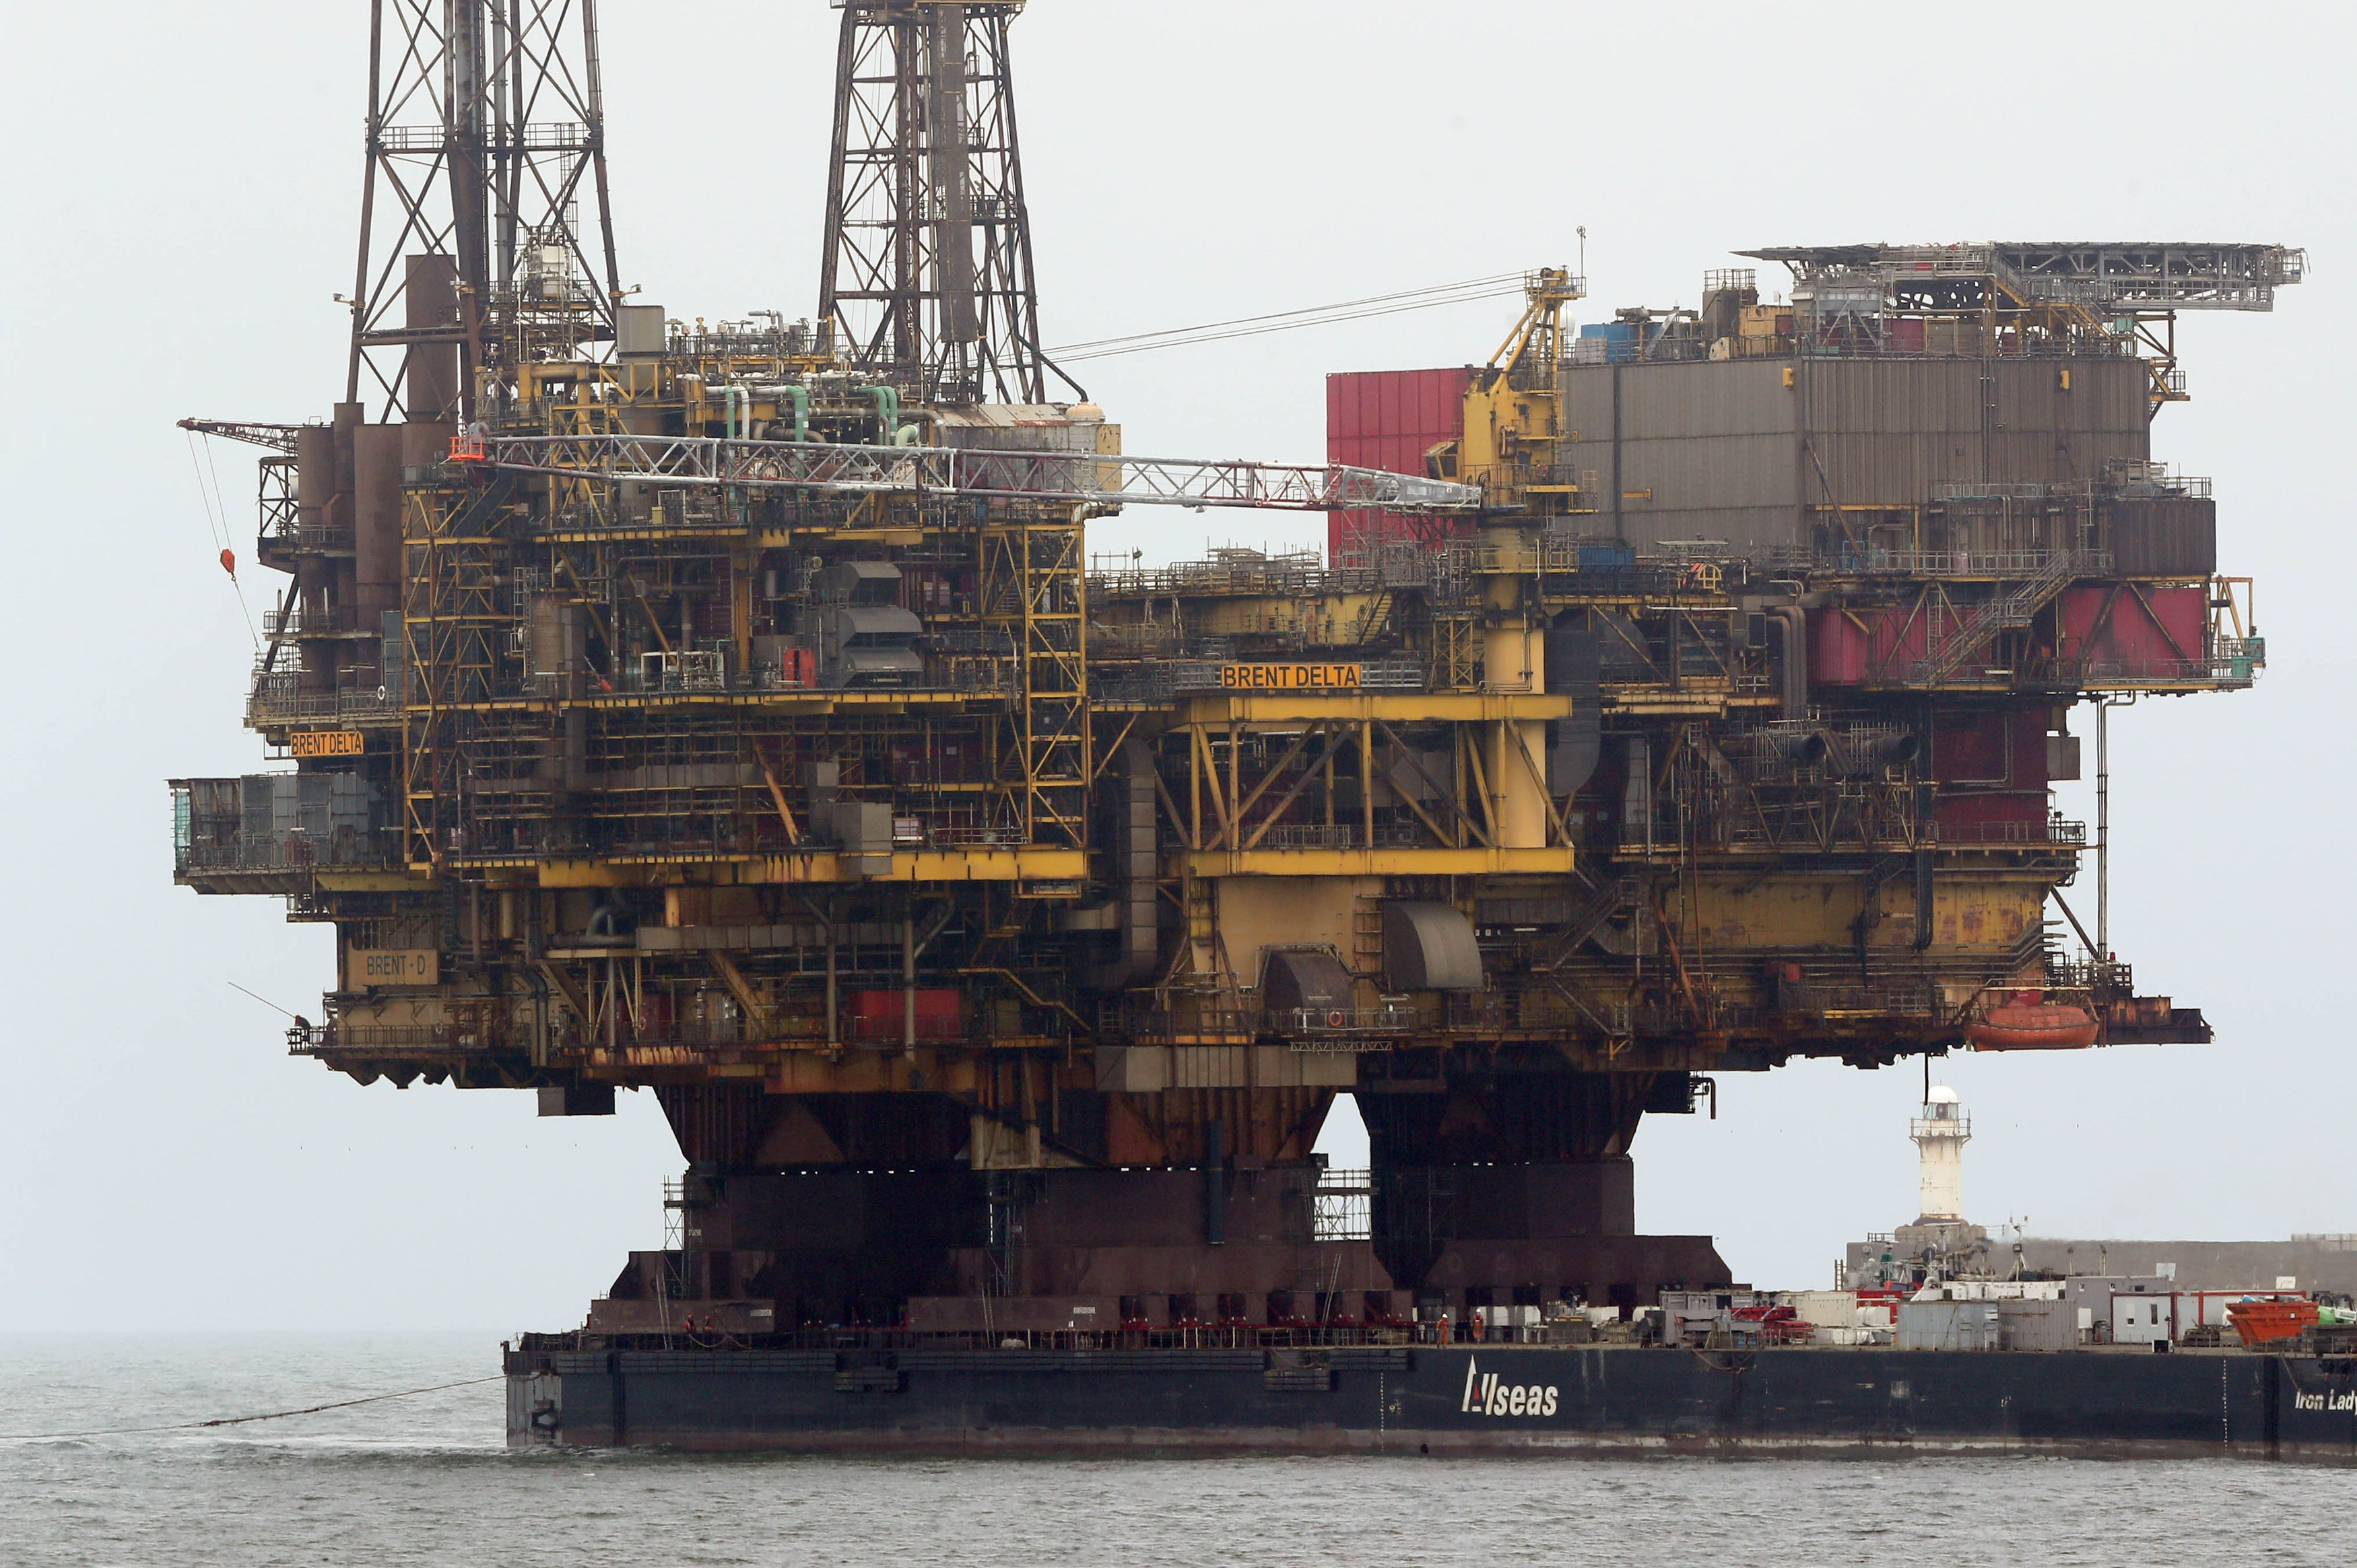 The Brent Delta platform being sent for decommissioning last year.